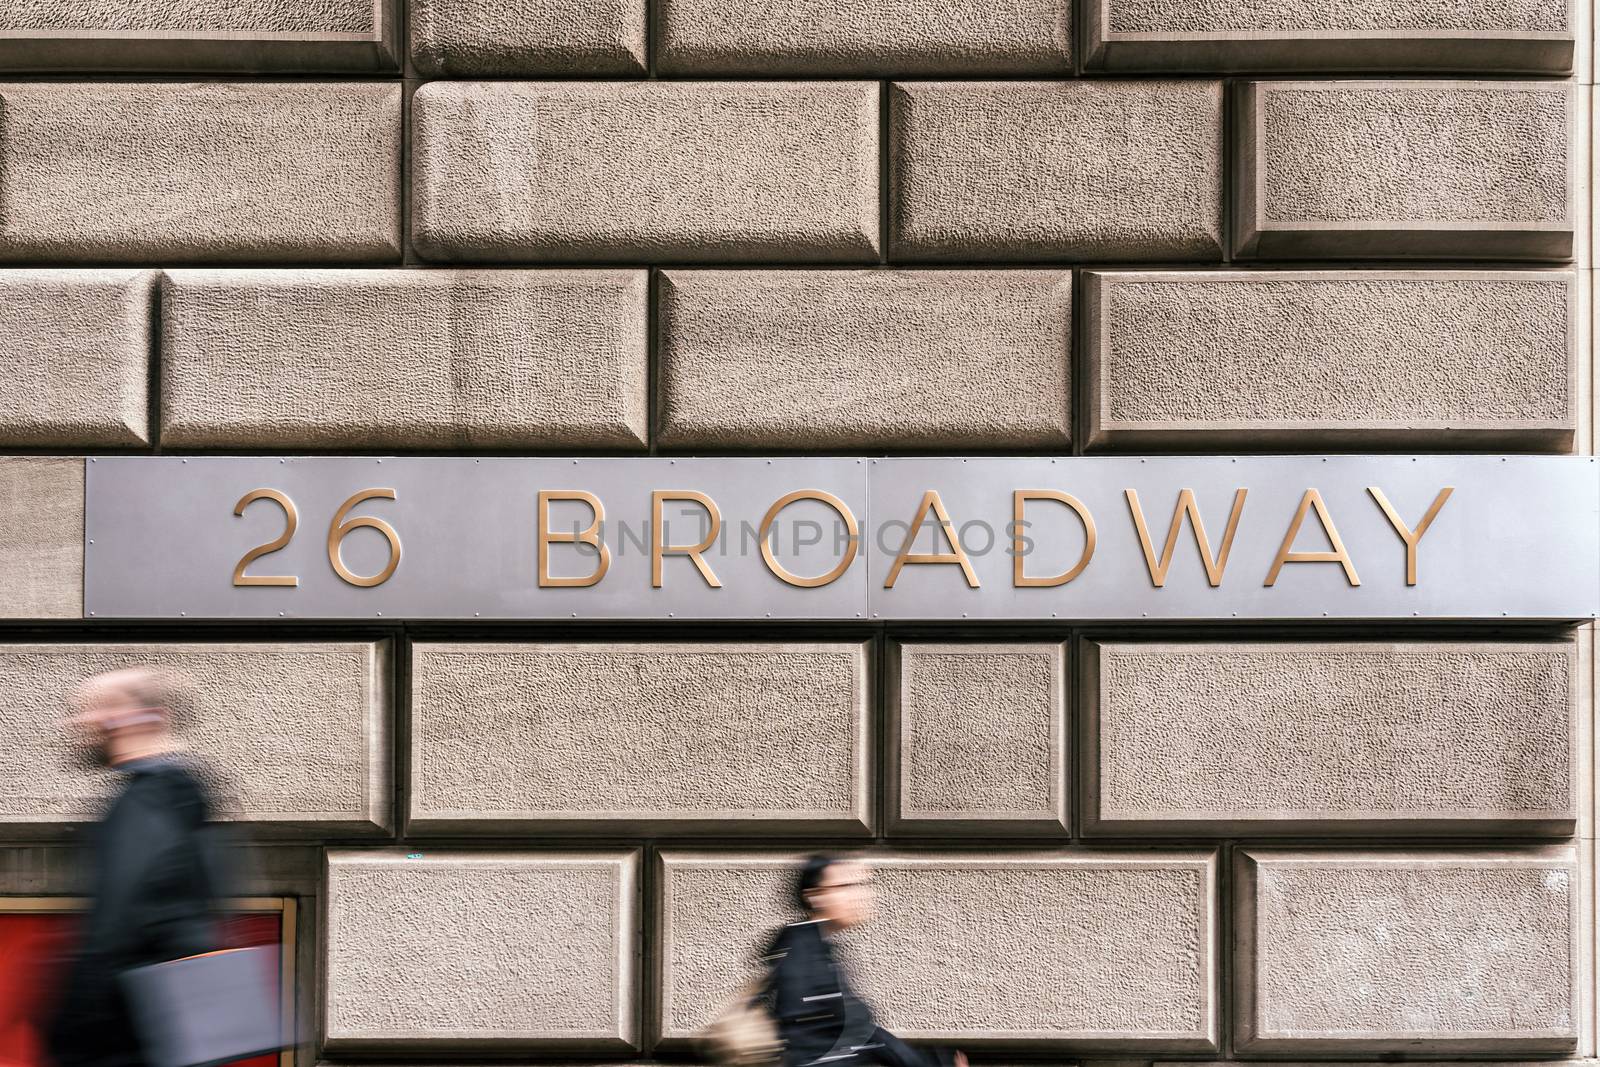 Broadway Street "26 BROADWAY" sign and wall street over vintage wall beside the street, Broadway is a road in the U.S. state of New York, Business and sing of landmark concept